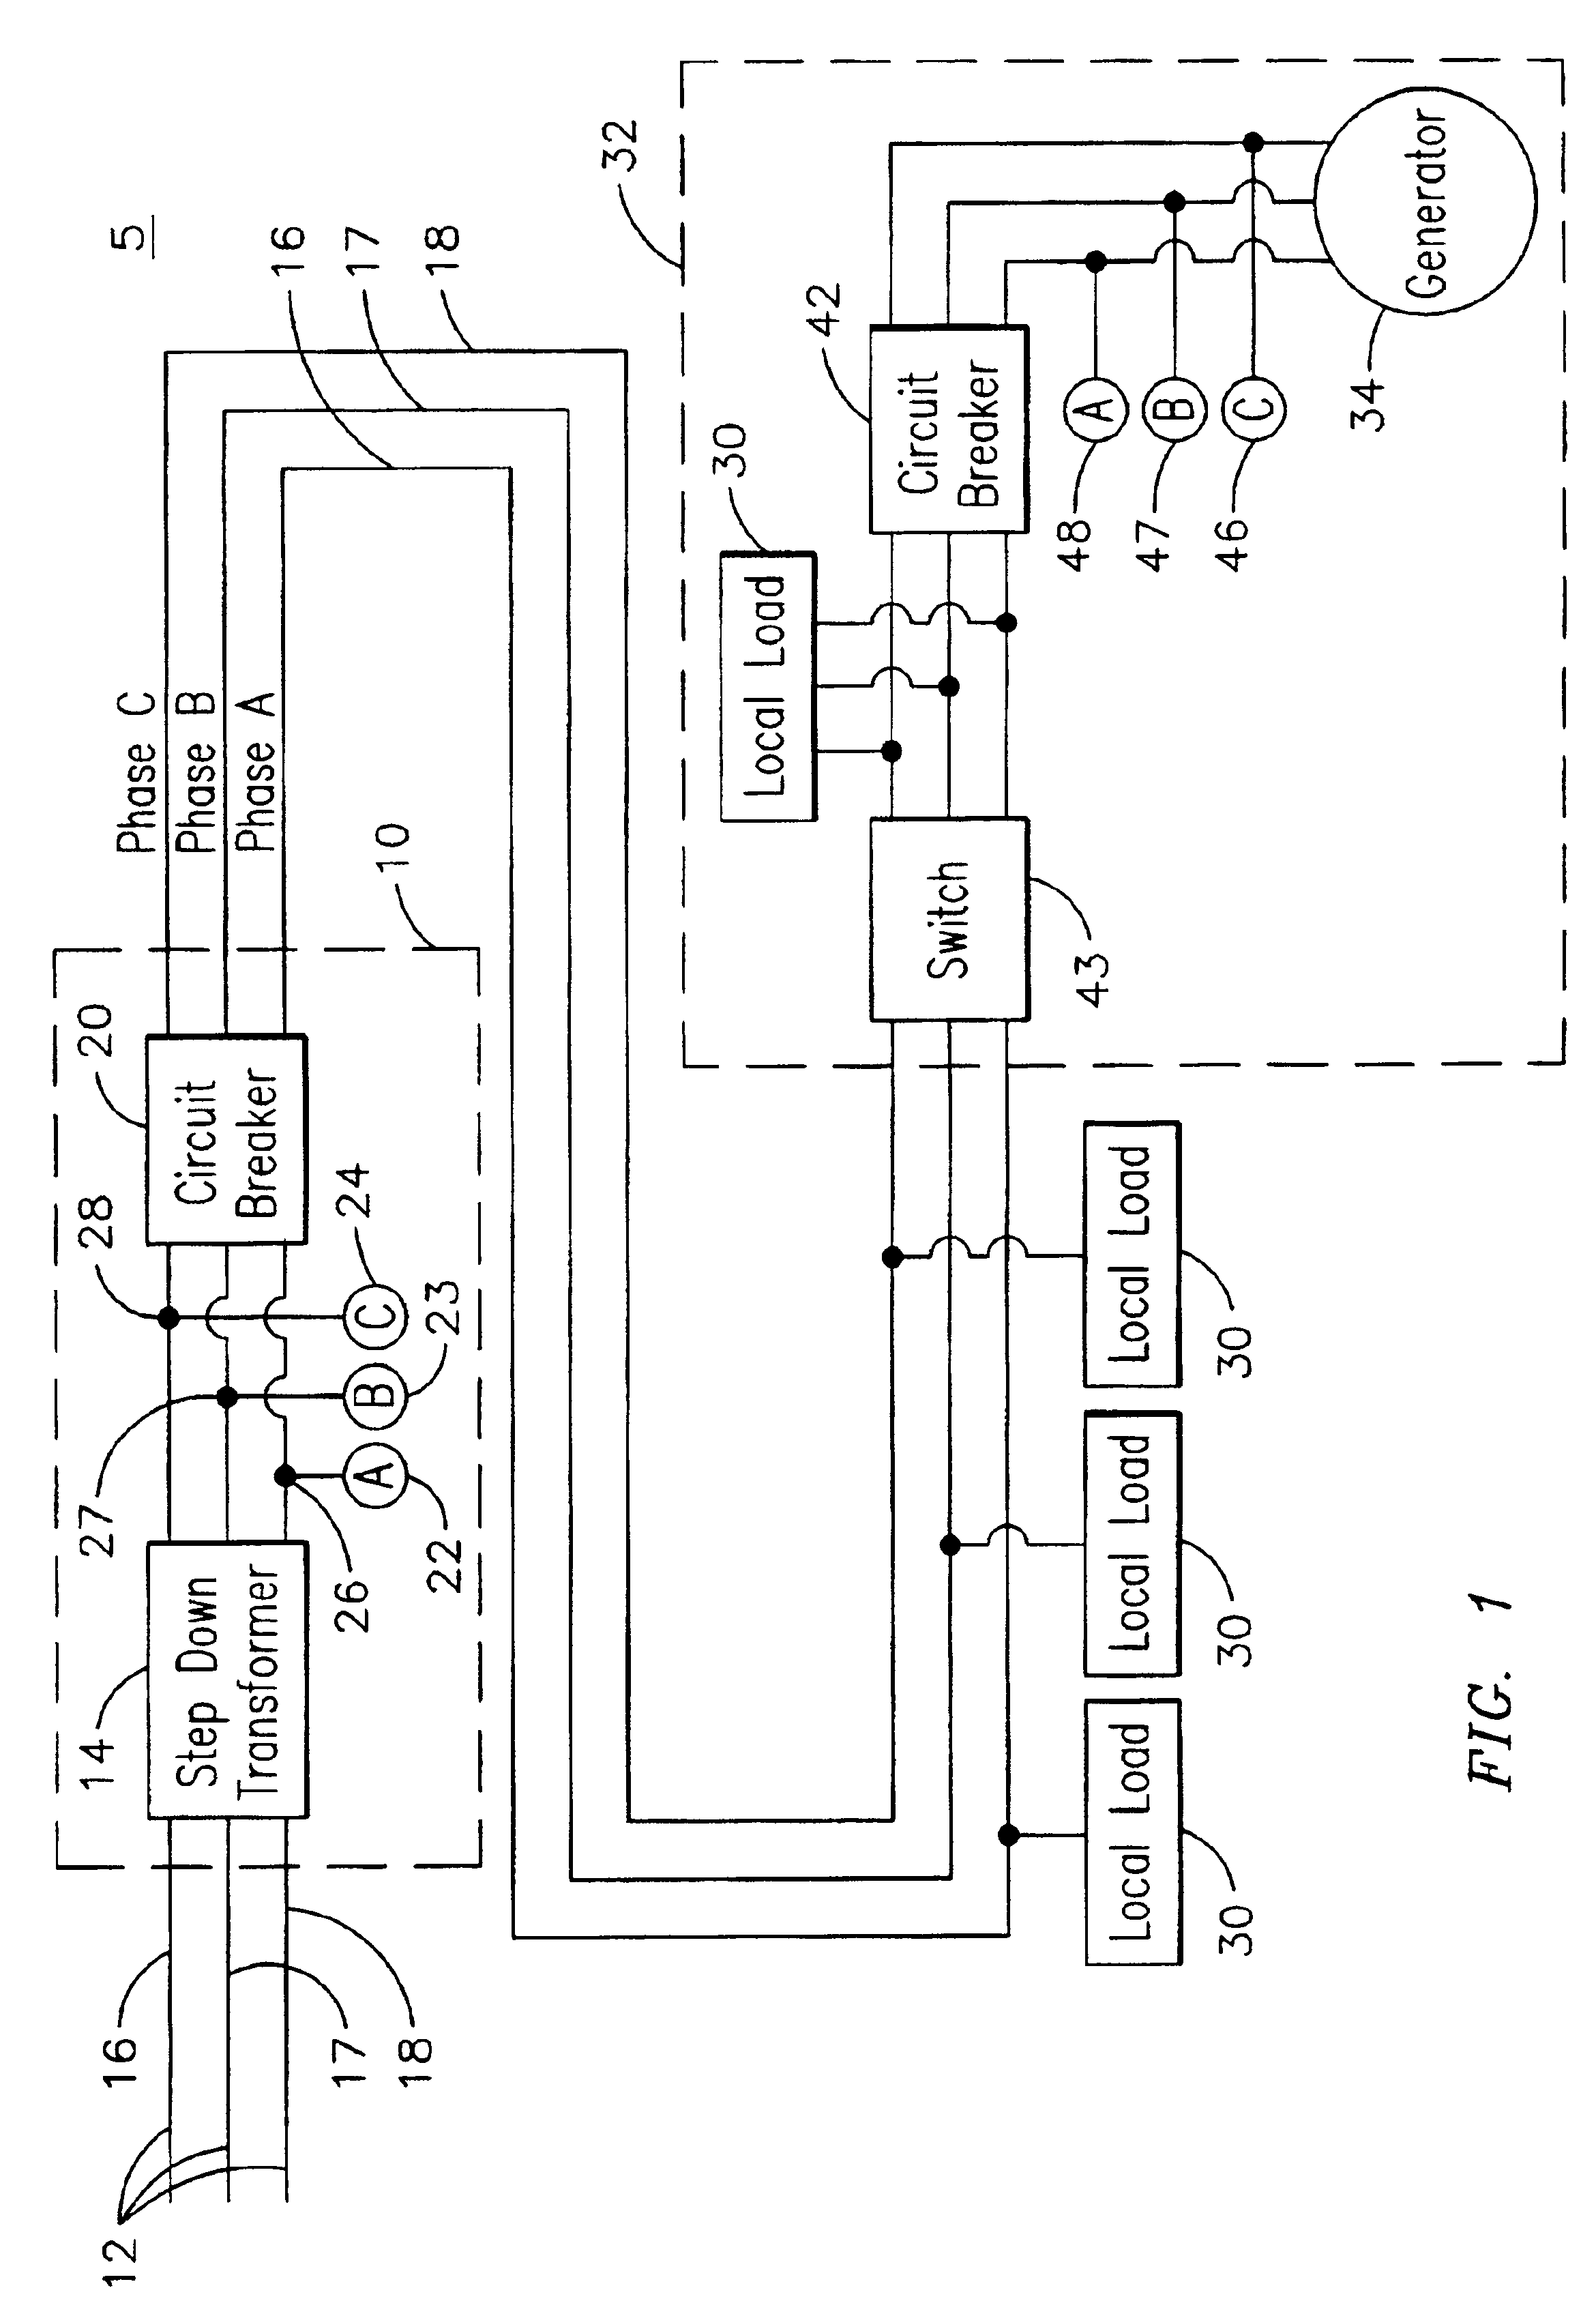 Utility control and autonomous disconnection of distributed generation from a power distribution system